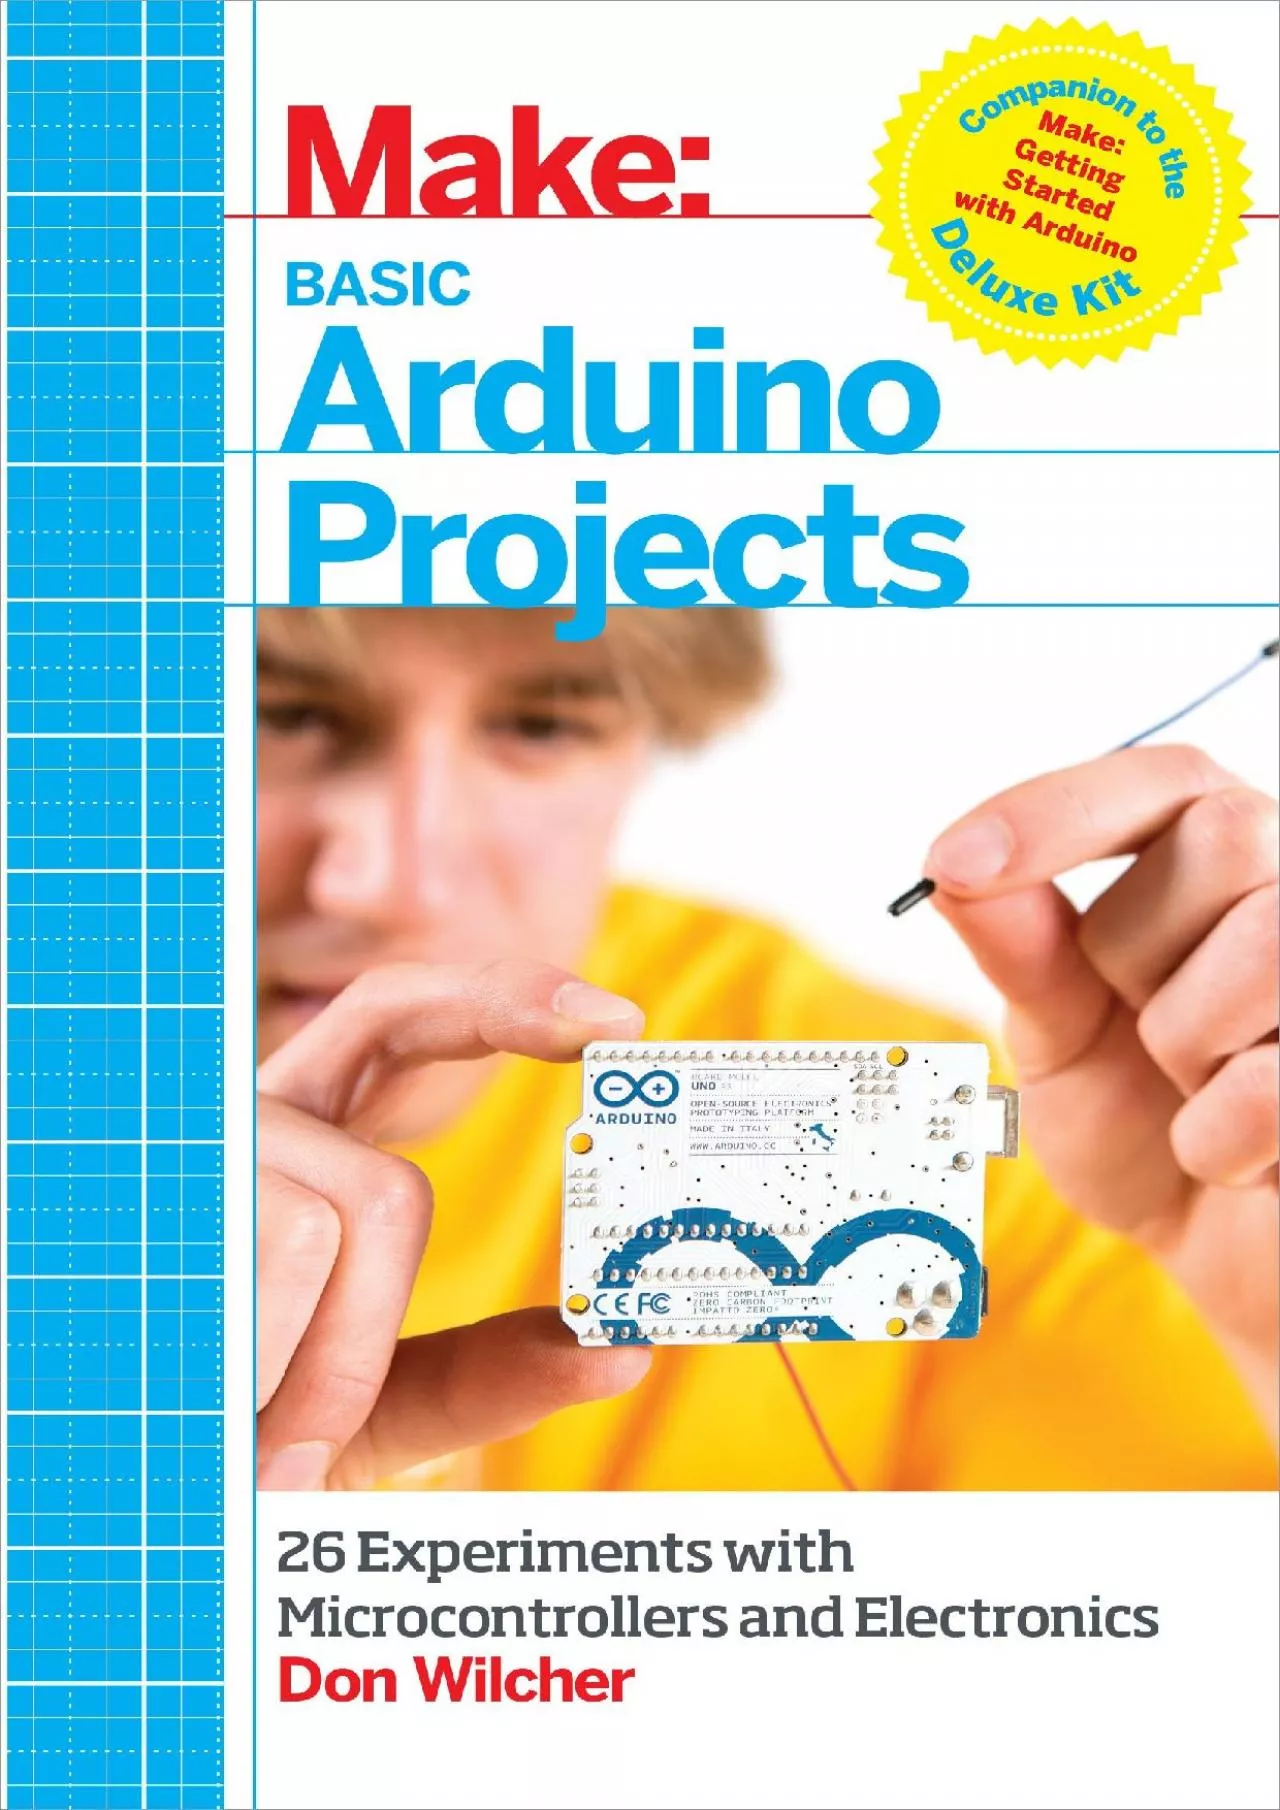 [eBOOK]-Basic Arduino Projects: 26 Experiments with Microcontrollers and Electronics (Make: